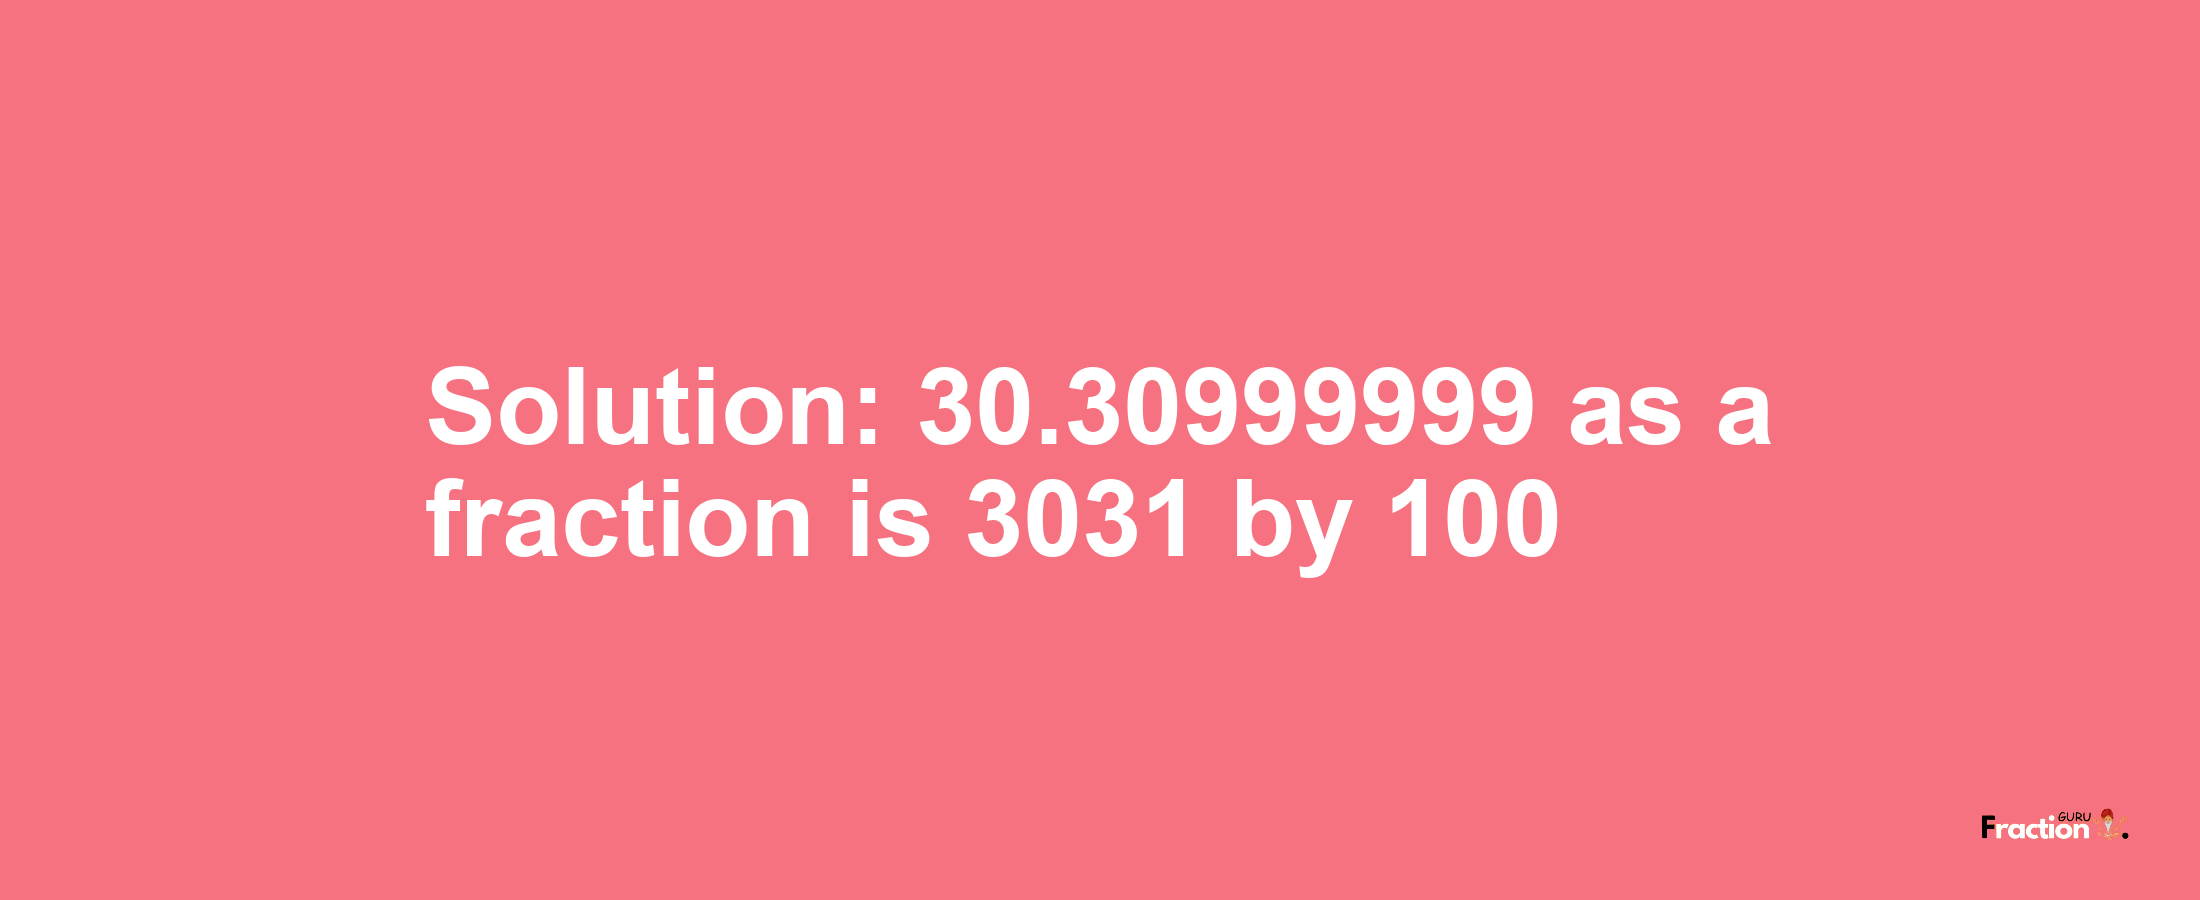 Solution:30.30999999 as a fraction is 3031/100